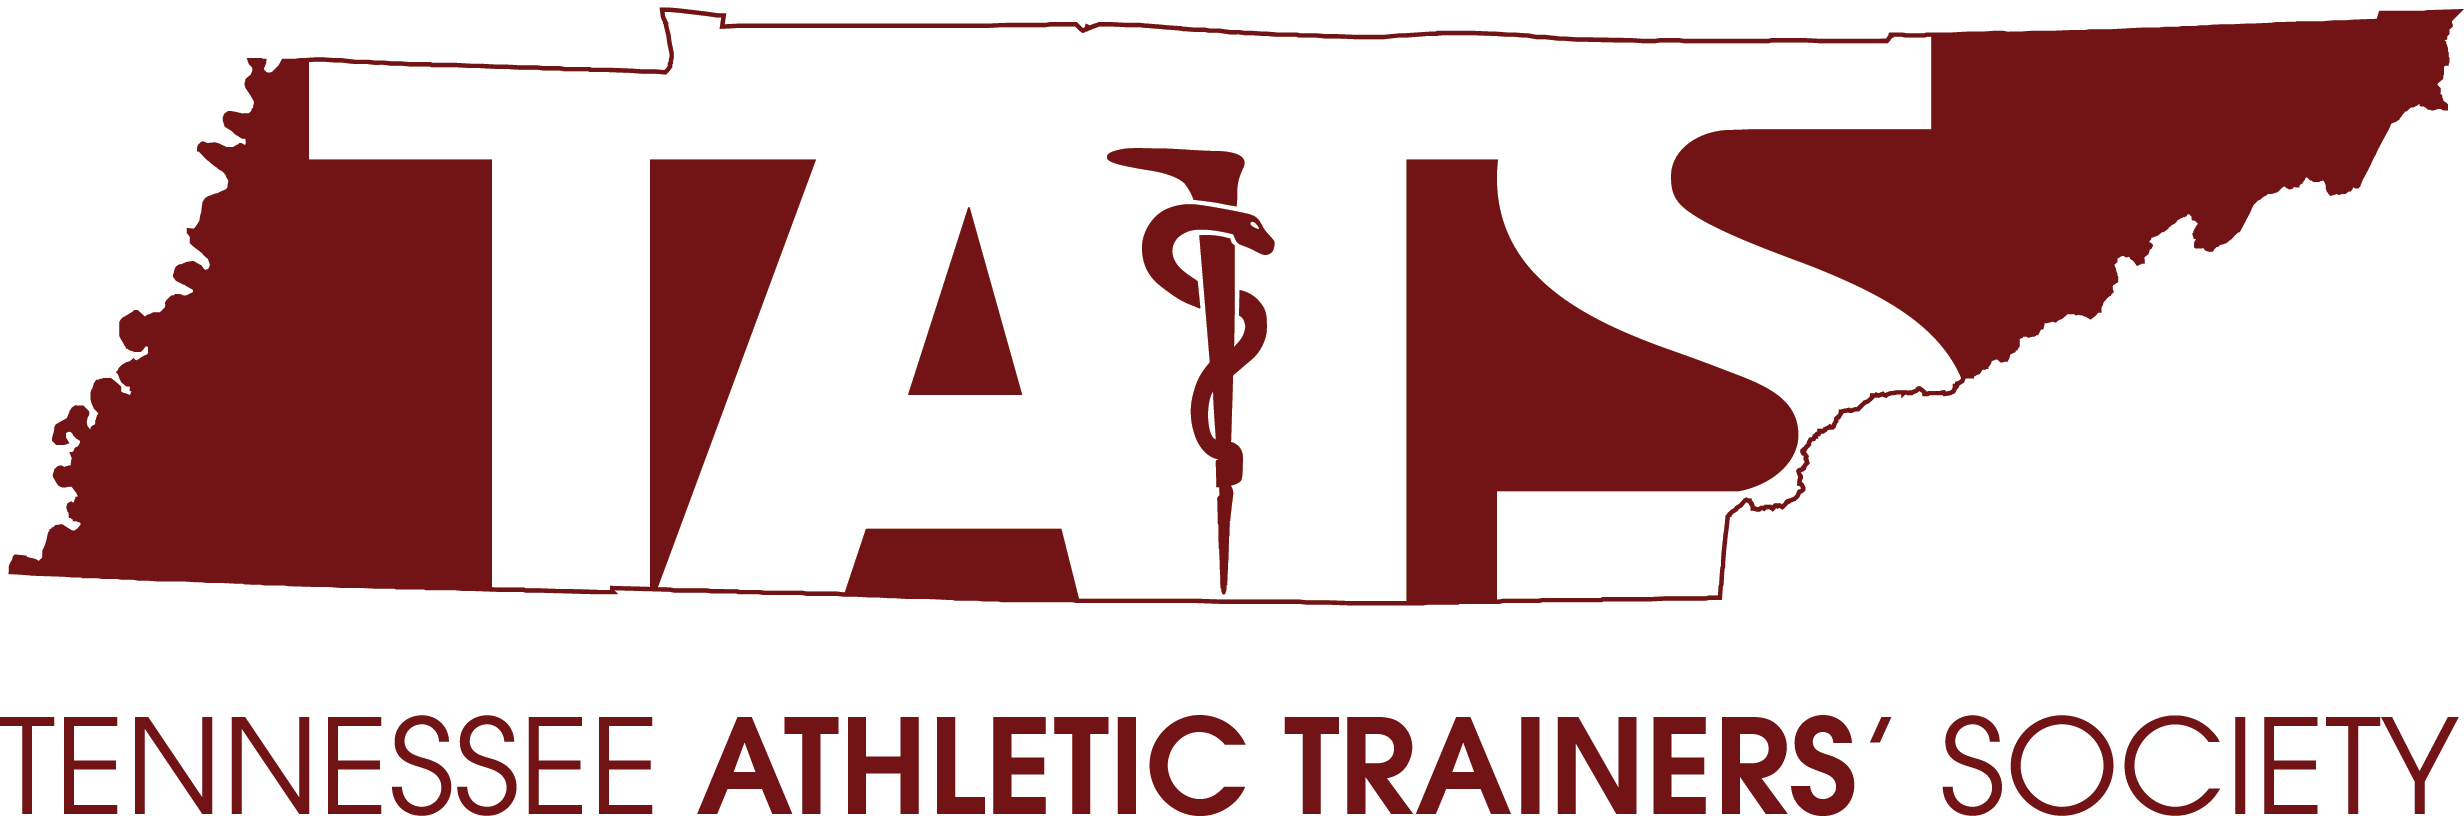 Tennessee Athletic' Trainers' Society Logo